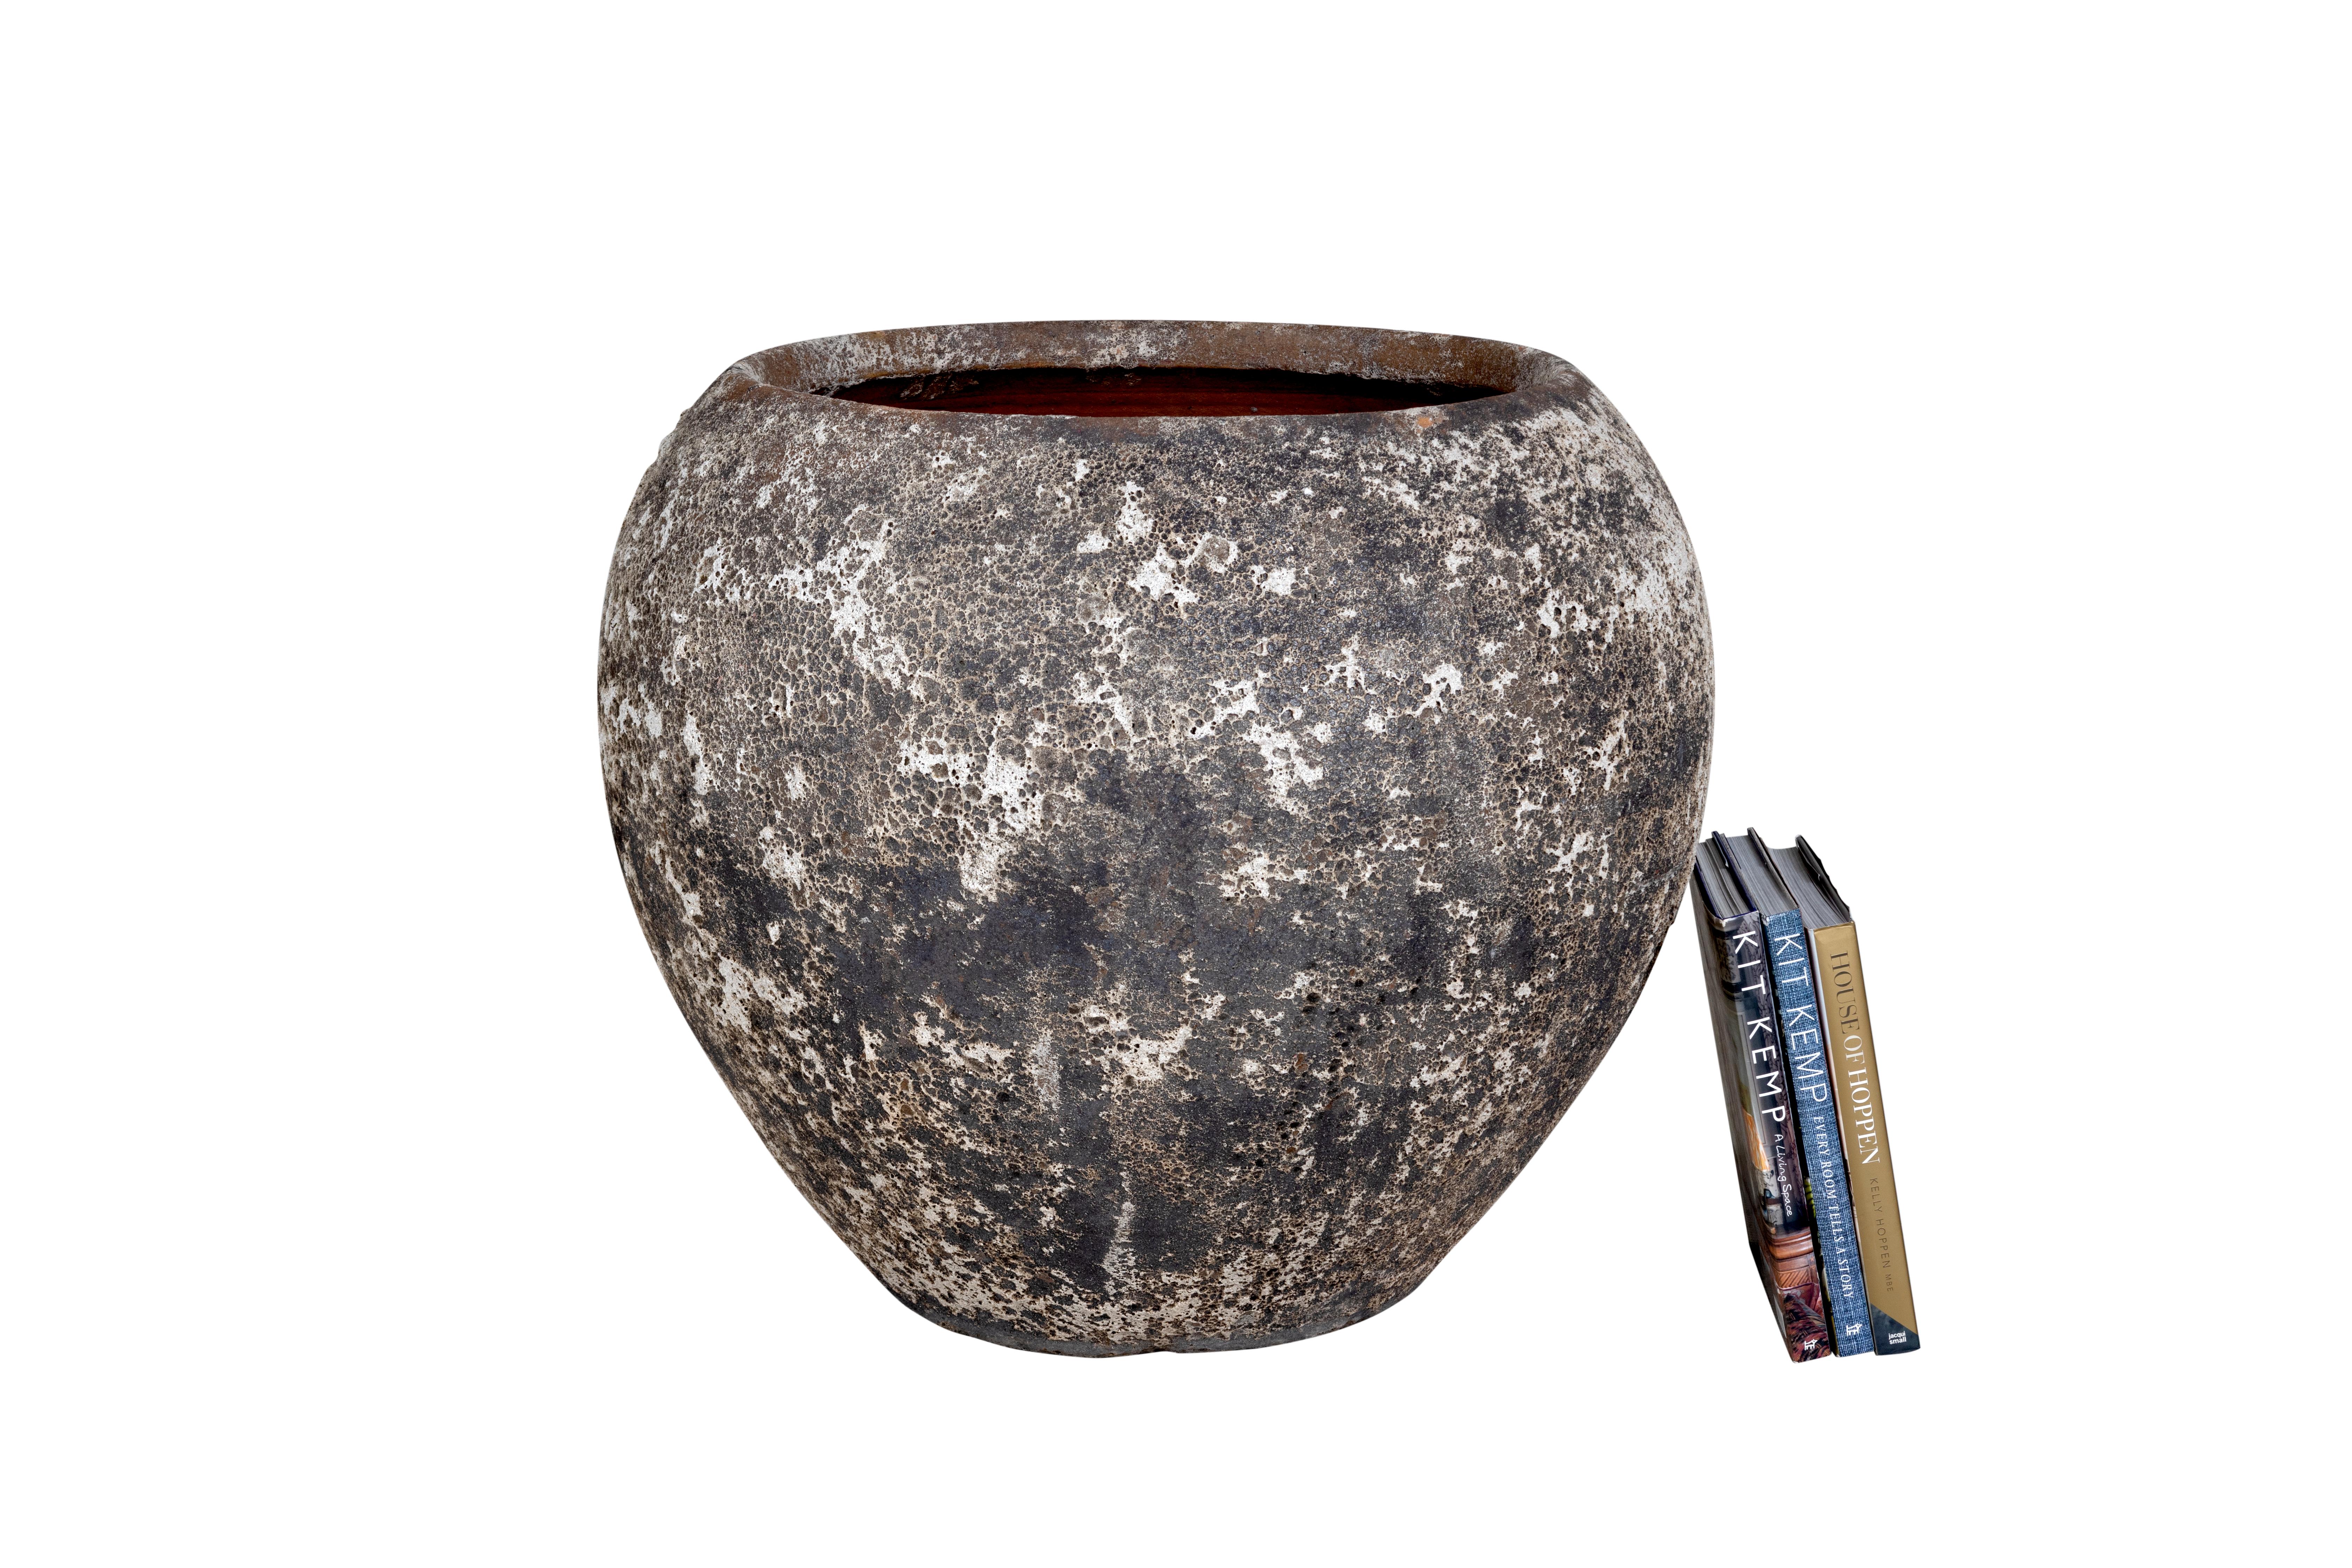 This large stone planter is perfect for outdoor use. Rust colored interior.

The piece is a part of our one-of-a-kind collection, Le Monde. Exclusive to us. 

Globally curated by Brendan Bass, Le Monde furniture and accessories offer modern